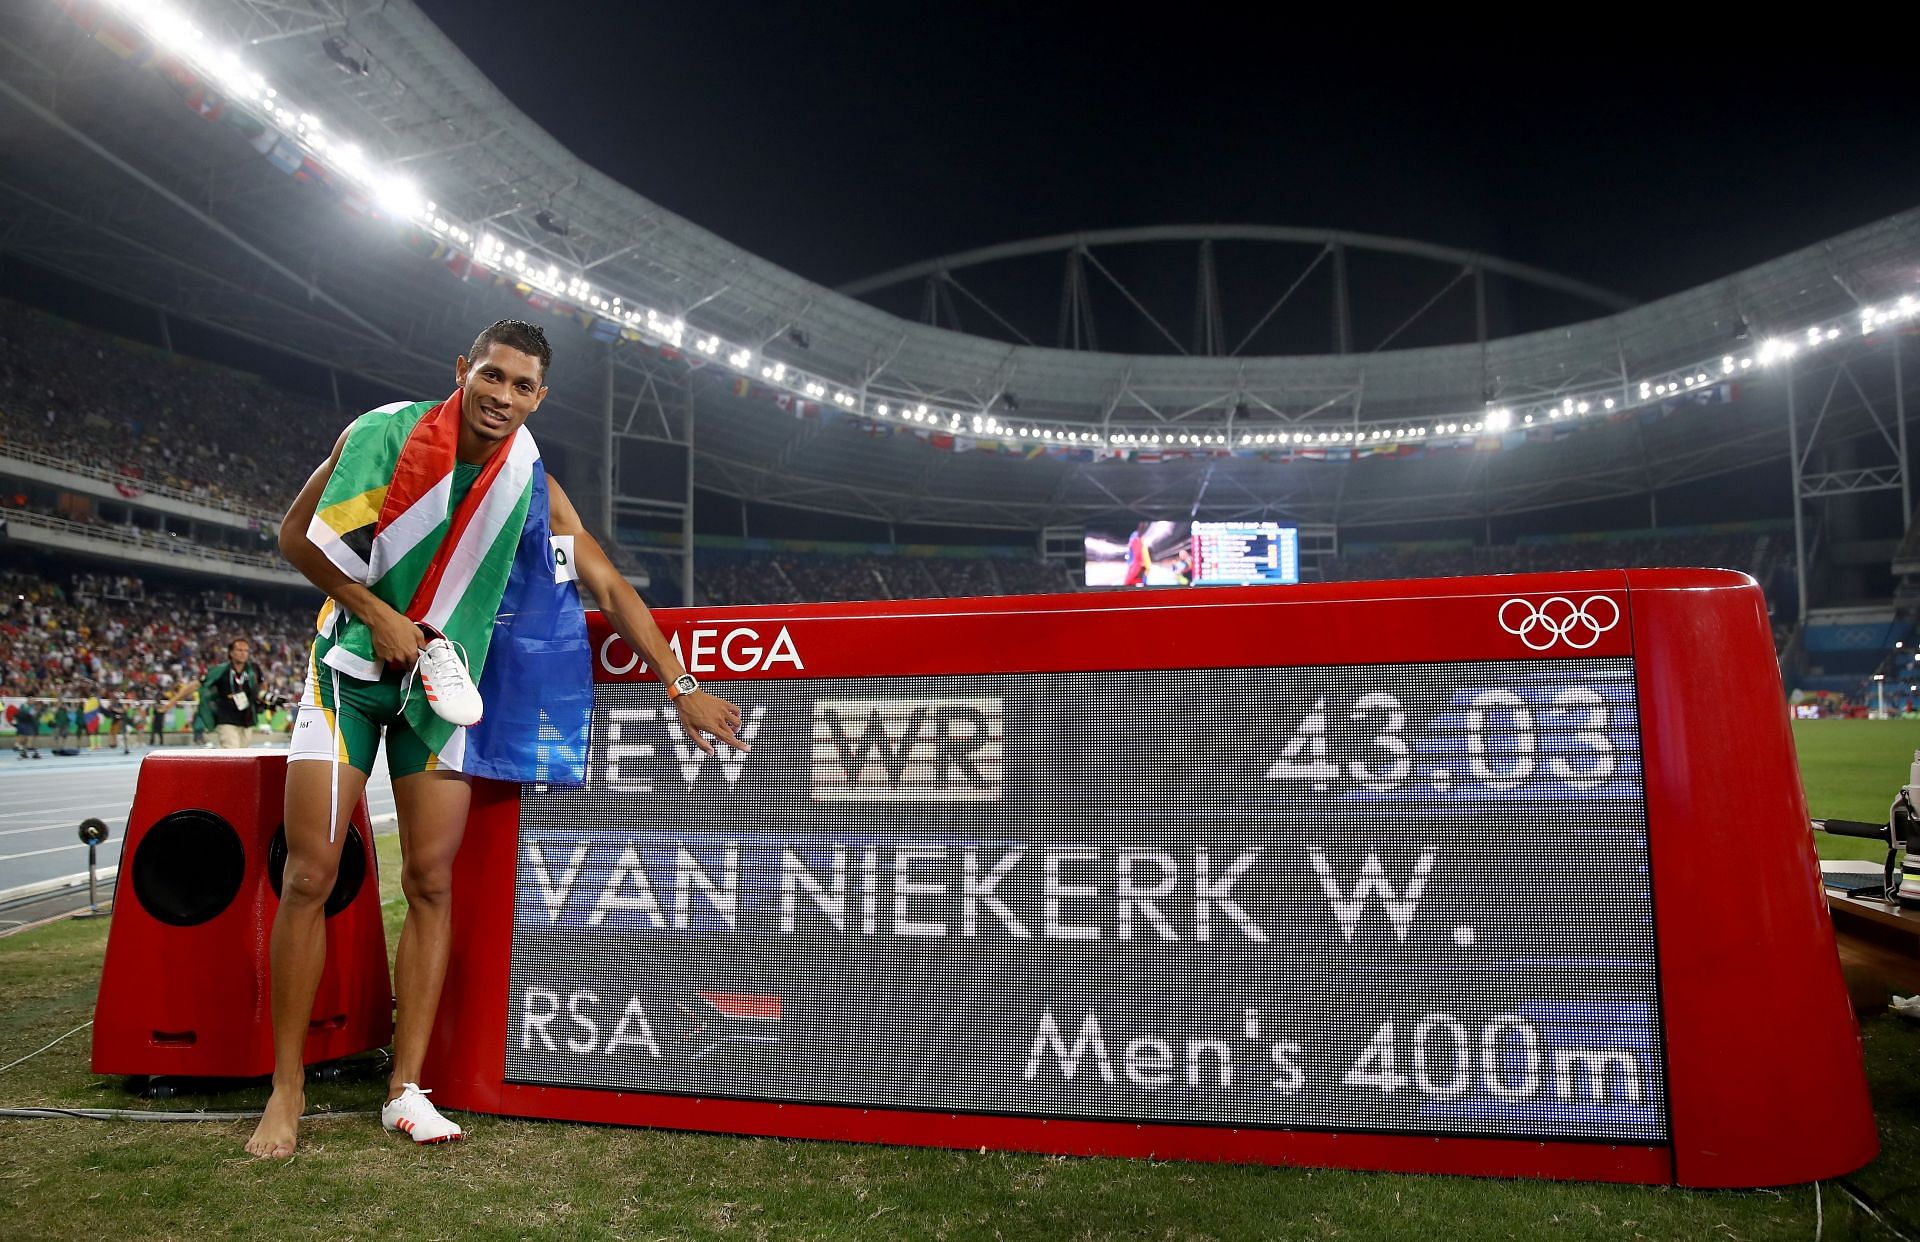 Wayde van Niekerk posing with a board showing his 400m world record at the 2016 Olympics in Rio de Janeiro.